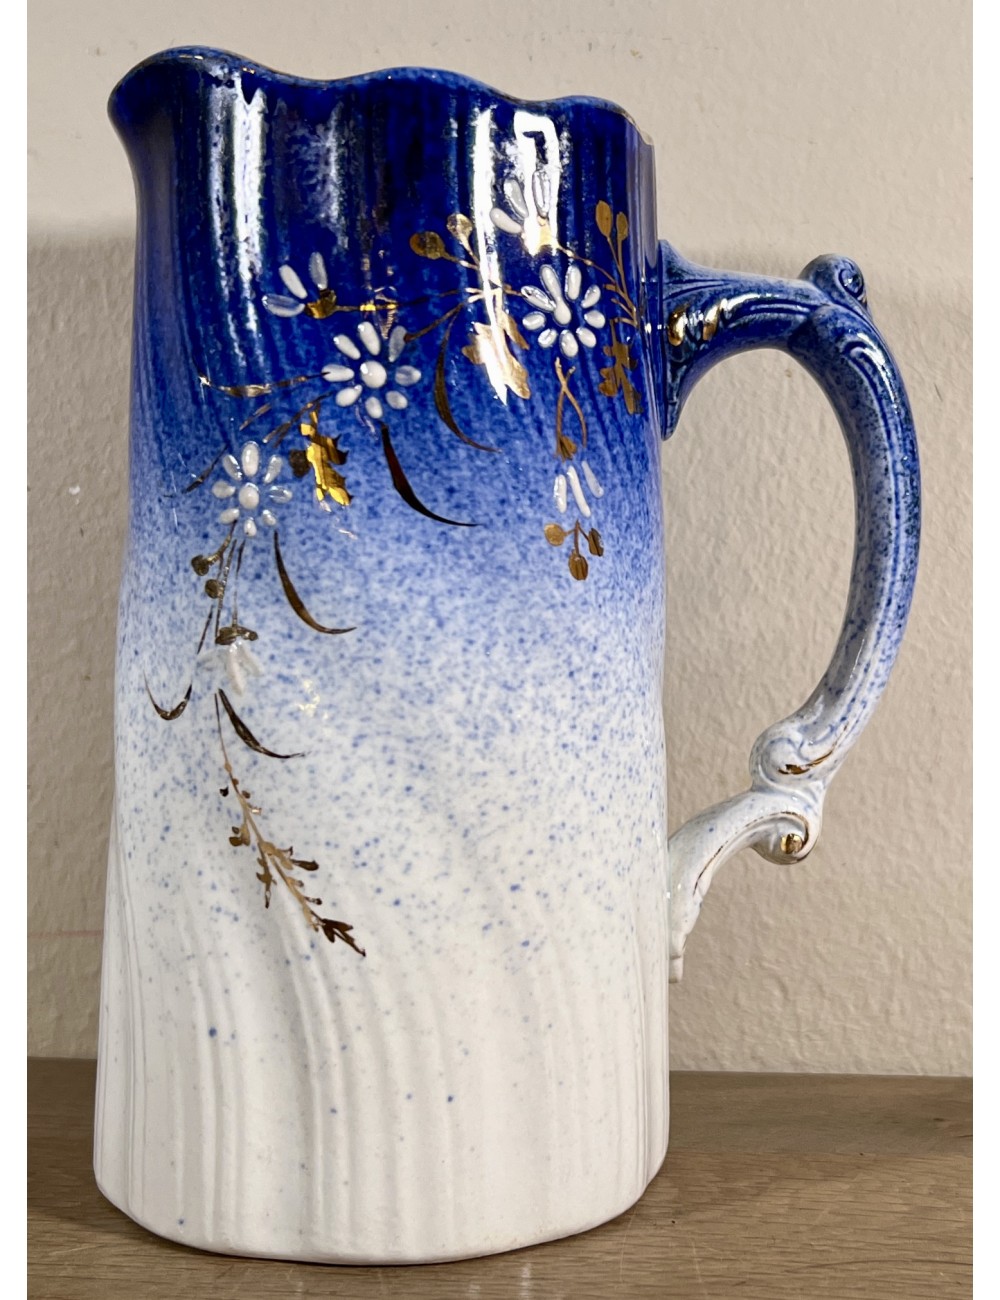 Jug - smaller model - Societe Ceramique Maestricht - slightly torsioned model with a color going from white to royal blue